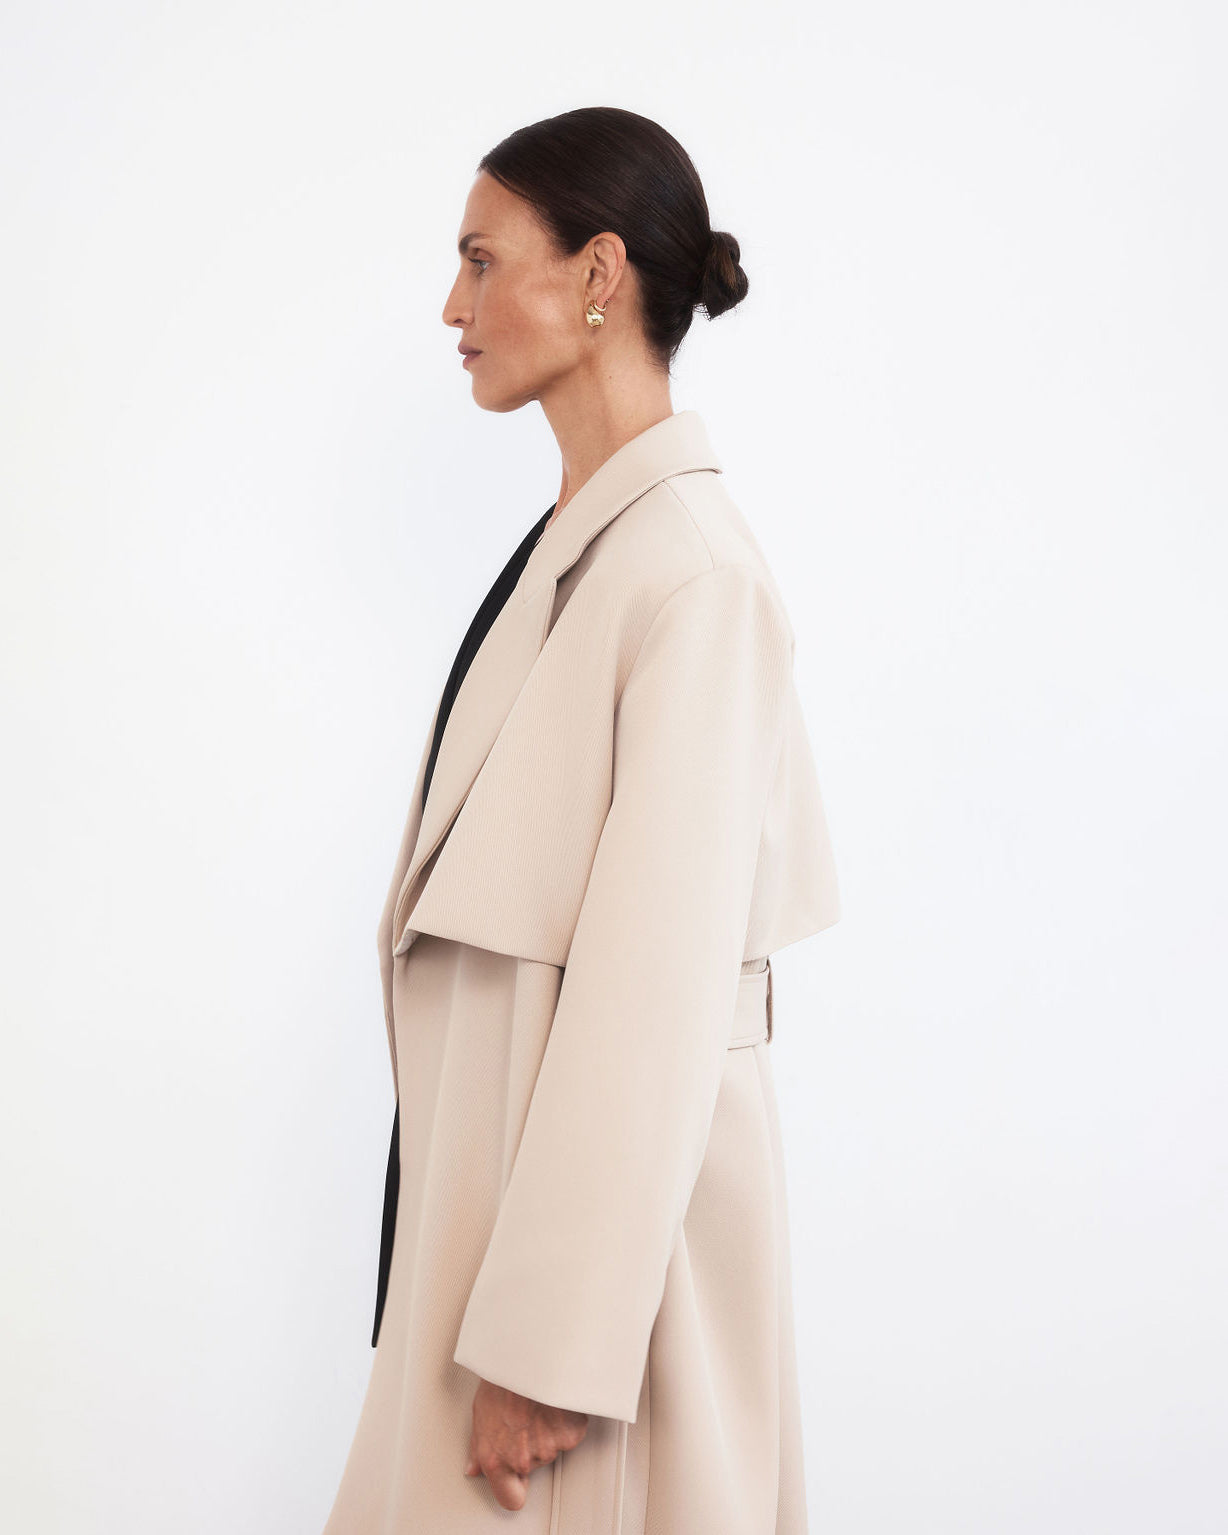 Mid photograph crop of a middle aged women with pulled back dark hair facing the left wearing a minimalistic trench coat in taupe with strong lapels and storm flap detail